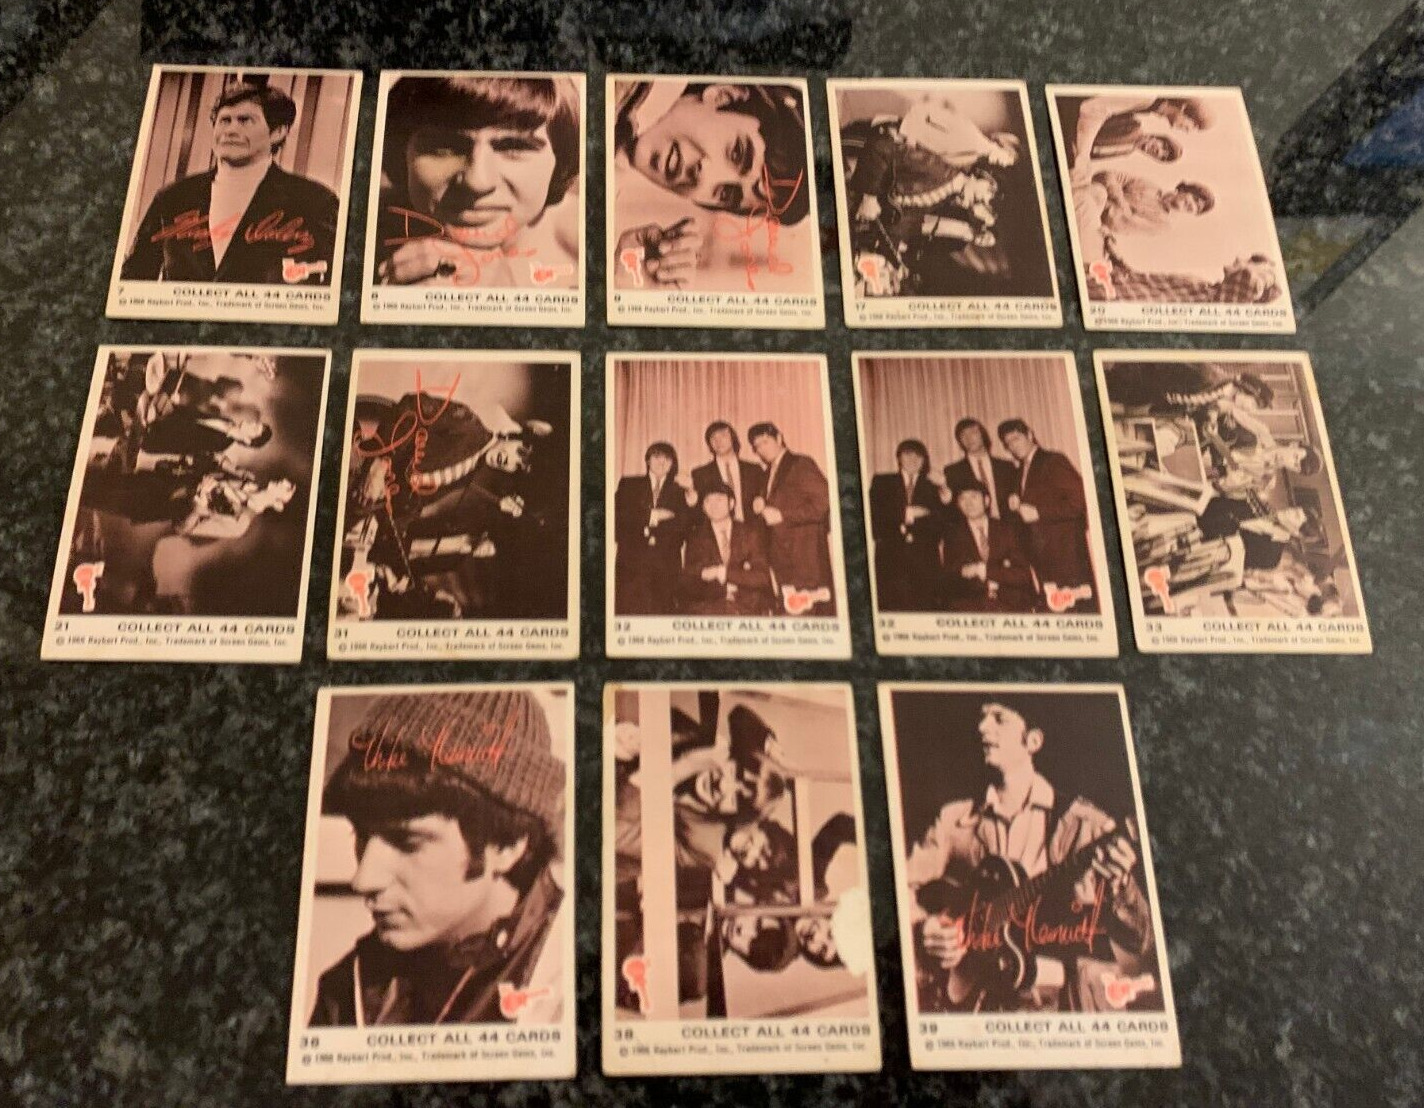 1966-67 Raybert MONKEES COLLECTION (B&W, SERIES A/B/C).......93 TOTAL